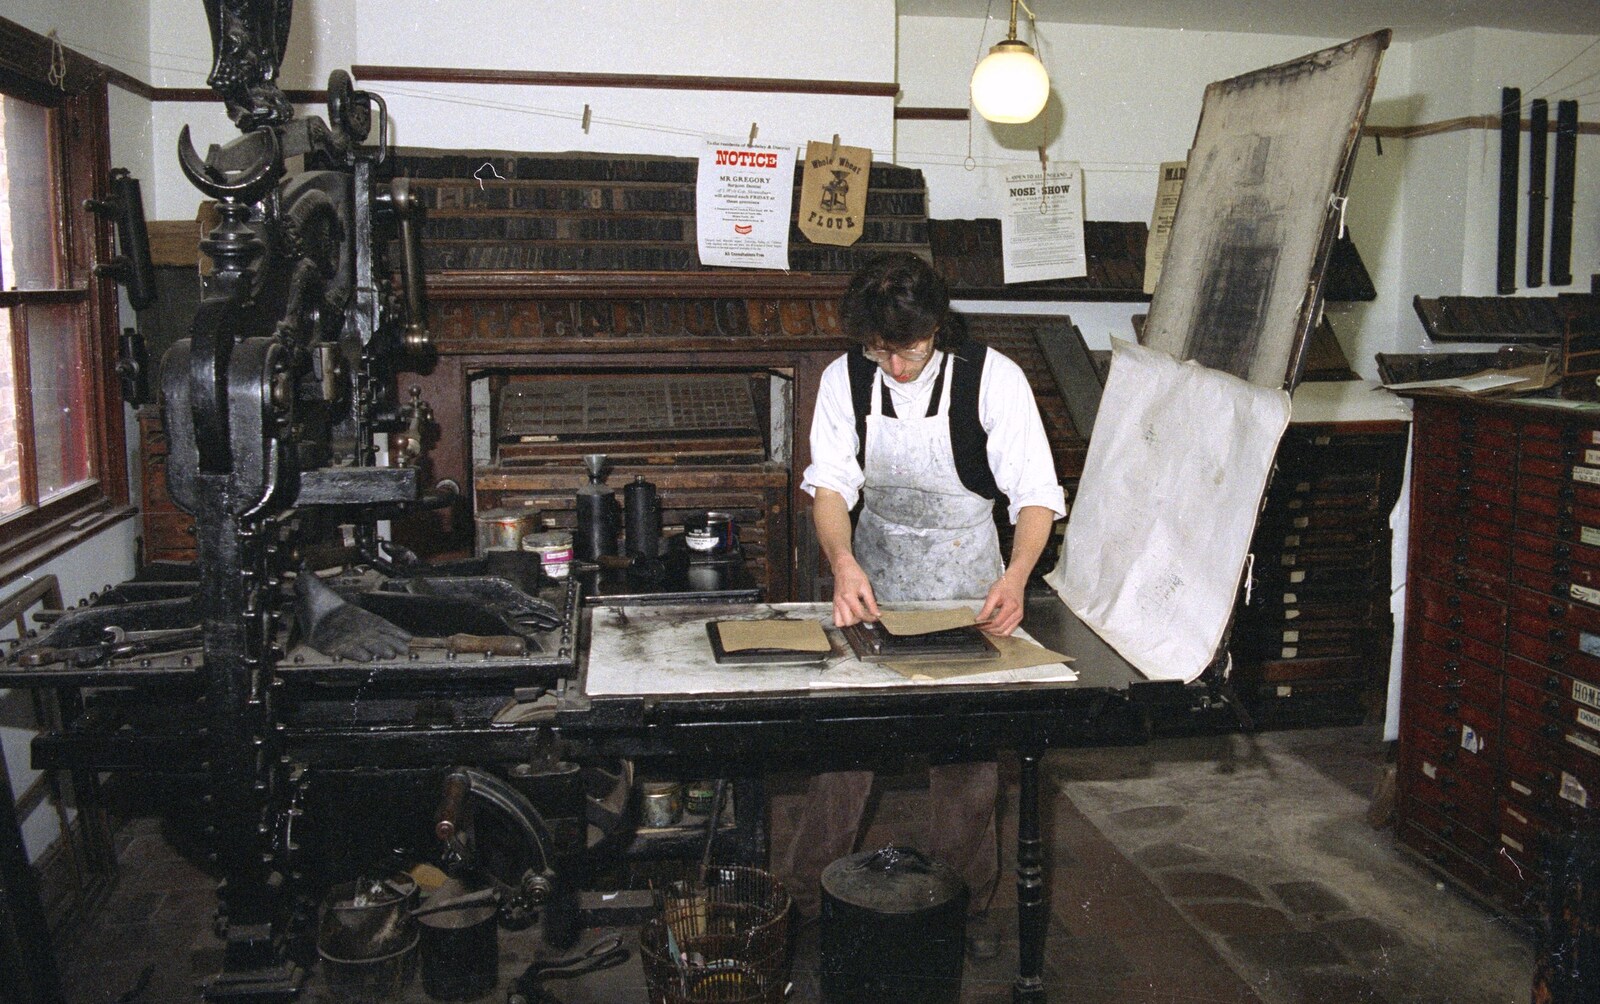 The print dude preps some printing from Capel Curig to Abergavenny: A Road-Trip With Hamish, Wales - 3rd April 1992